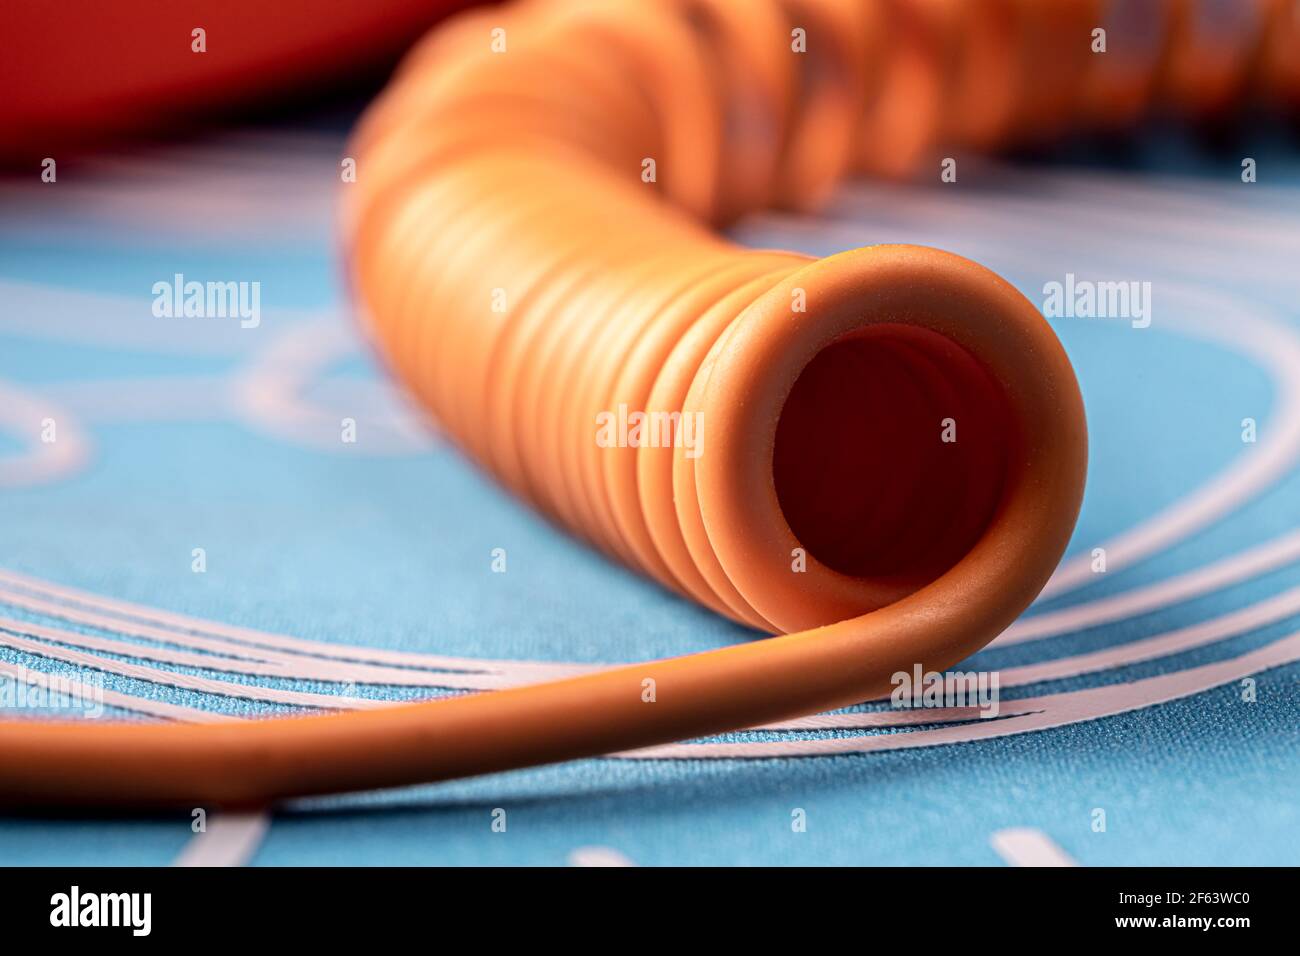 Twisted orange telephone cord on a blue background. Closeup photo with a low depth of field. Stock Photo